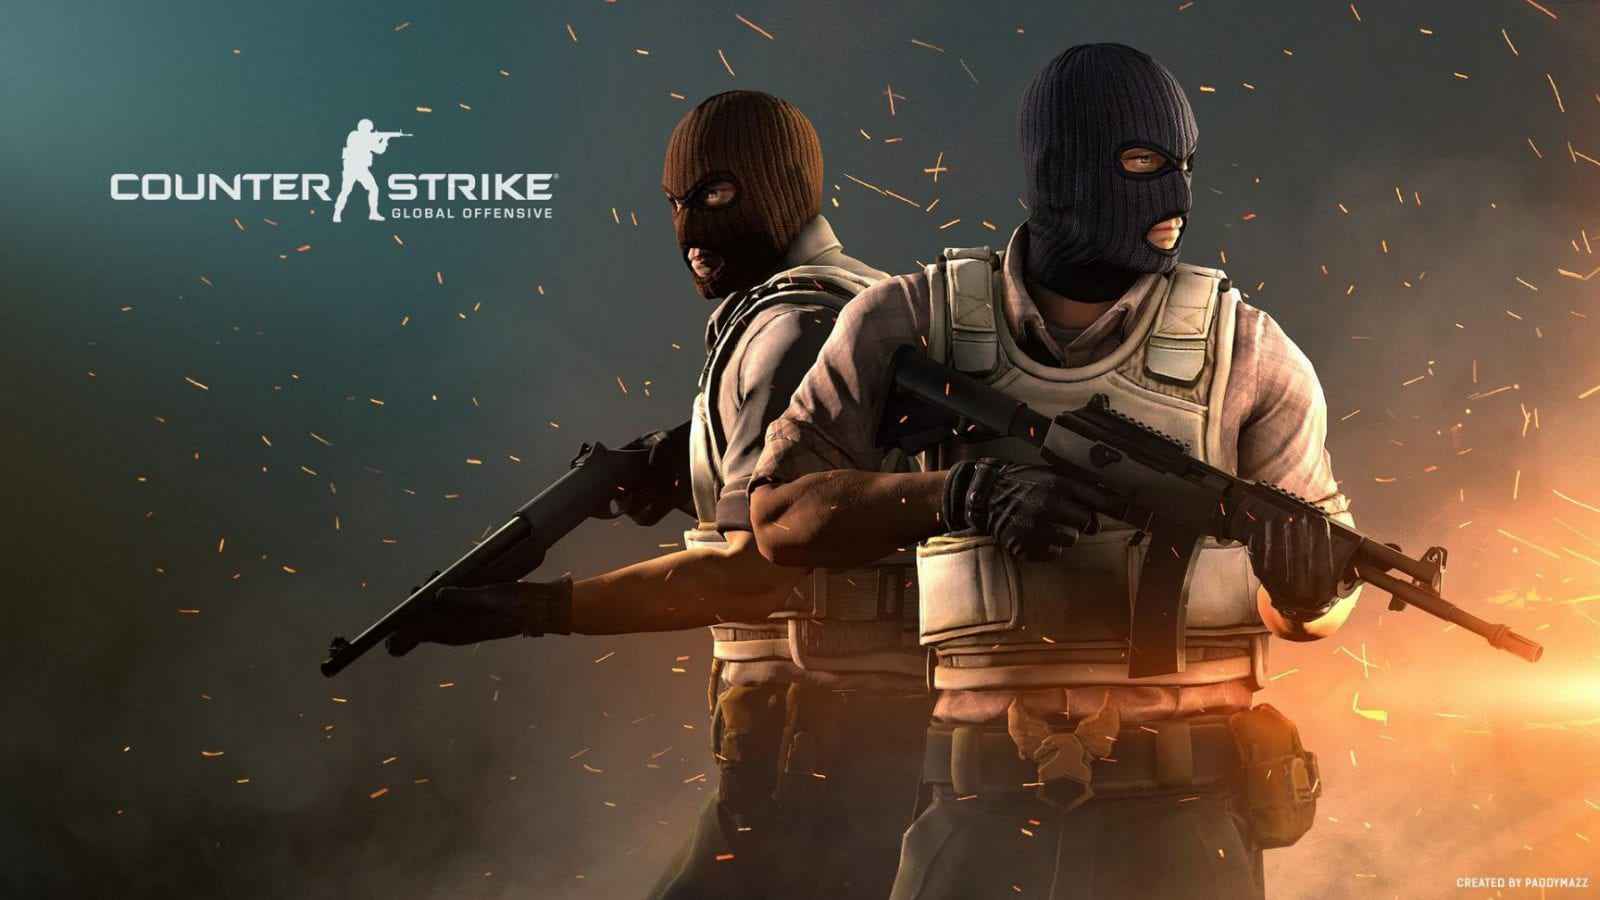 CS:GO update (April 10) patch notes live for PC - Weapons Adjustments & Map changes